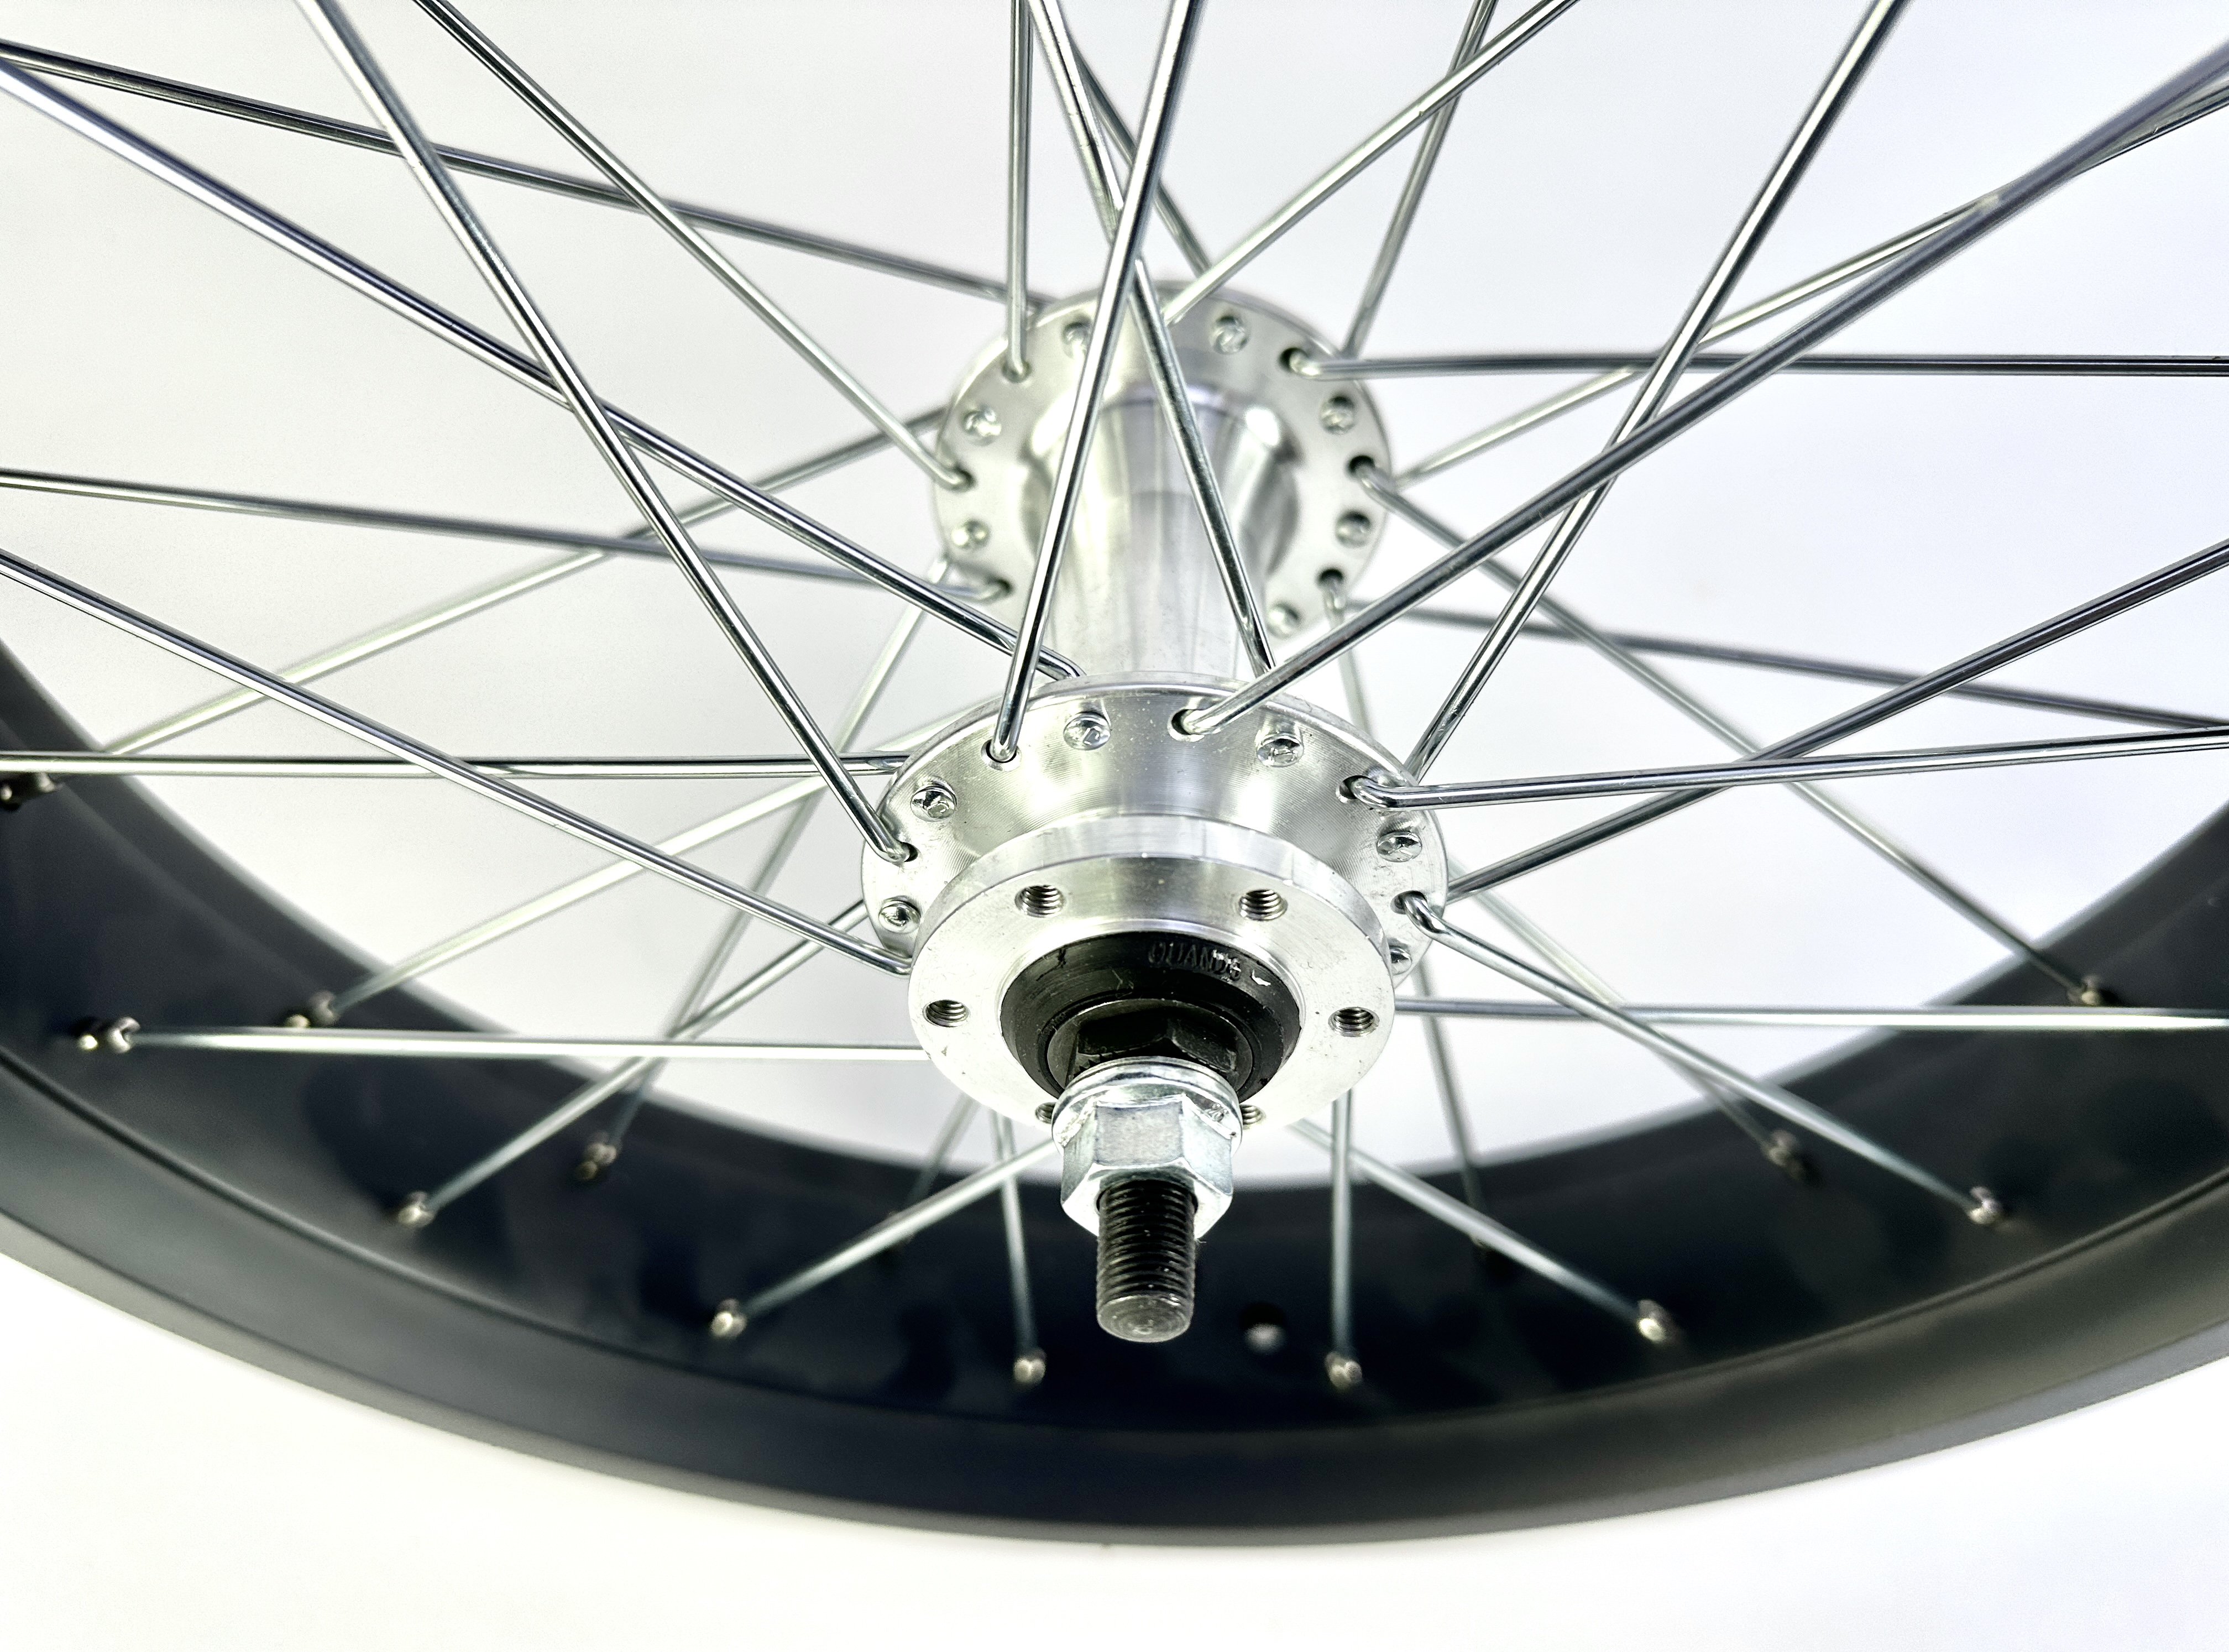 204 Front Wheel  20 x 4 inch Fat Bike 80 mm black for Disk silver Hub, 2nd choice